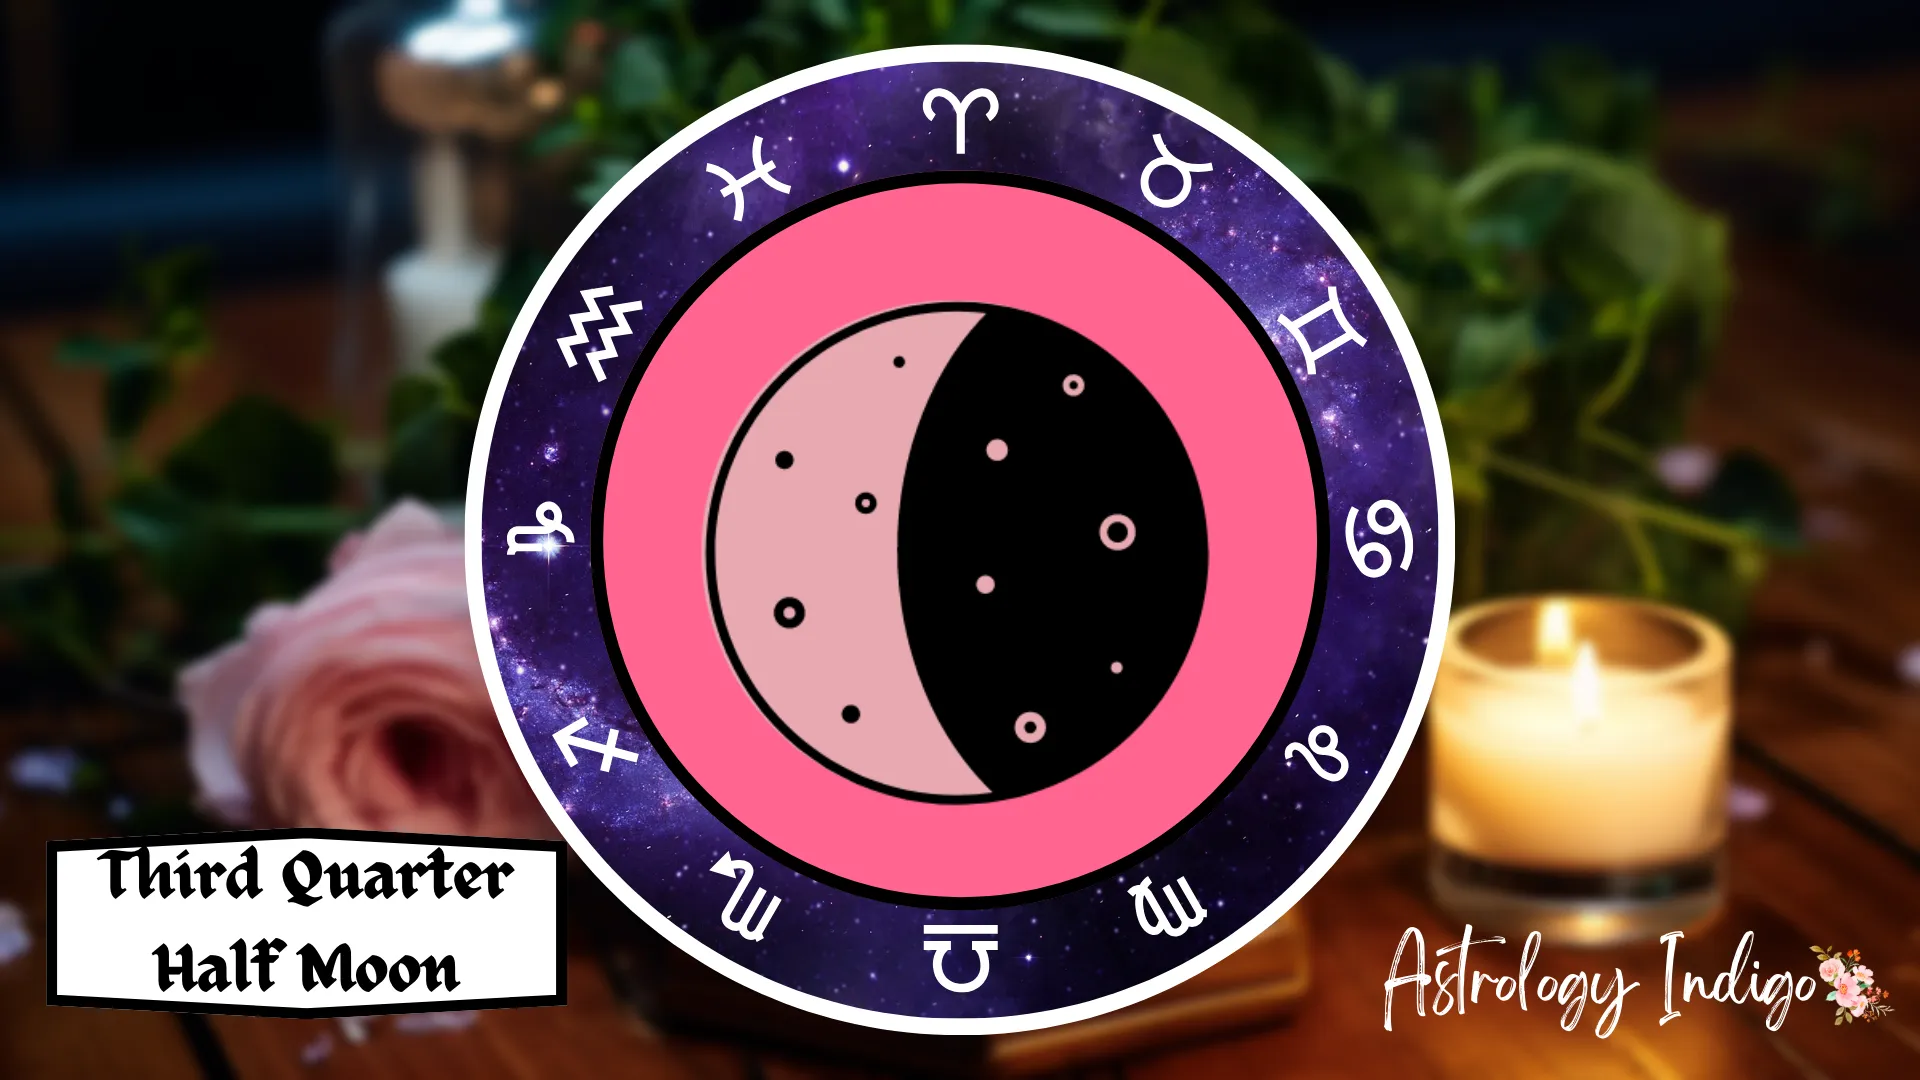 A symbol of a Third Quarter Half Moon is surrounded by the Zodiac signs on a table with flowers and candles